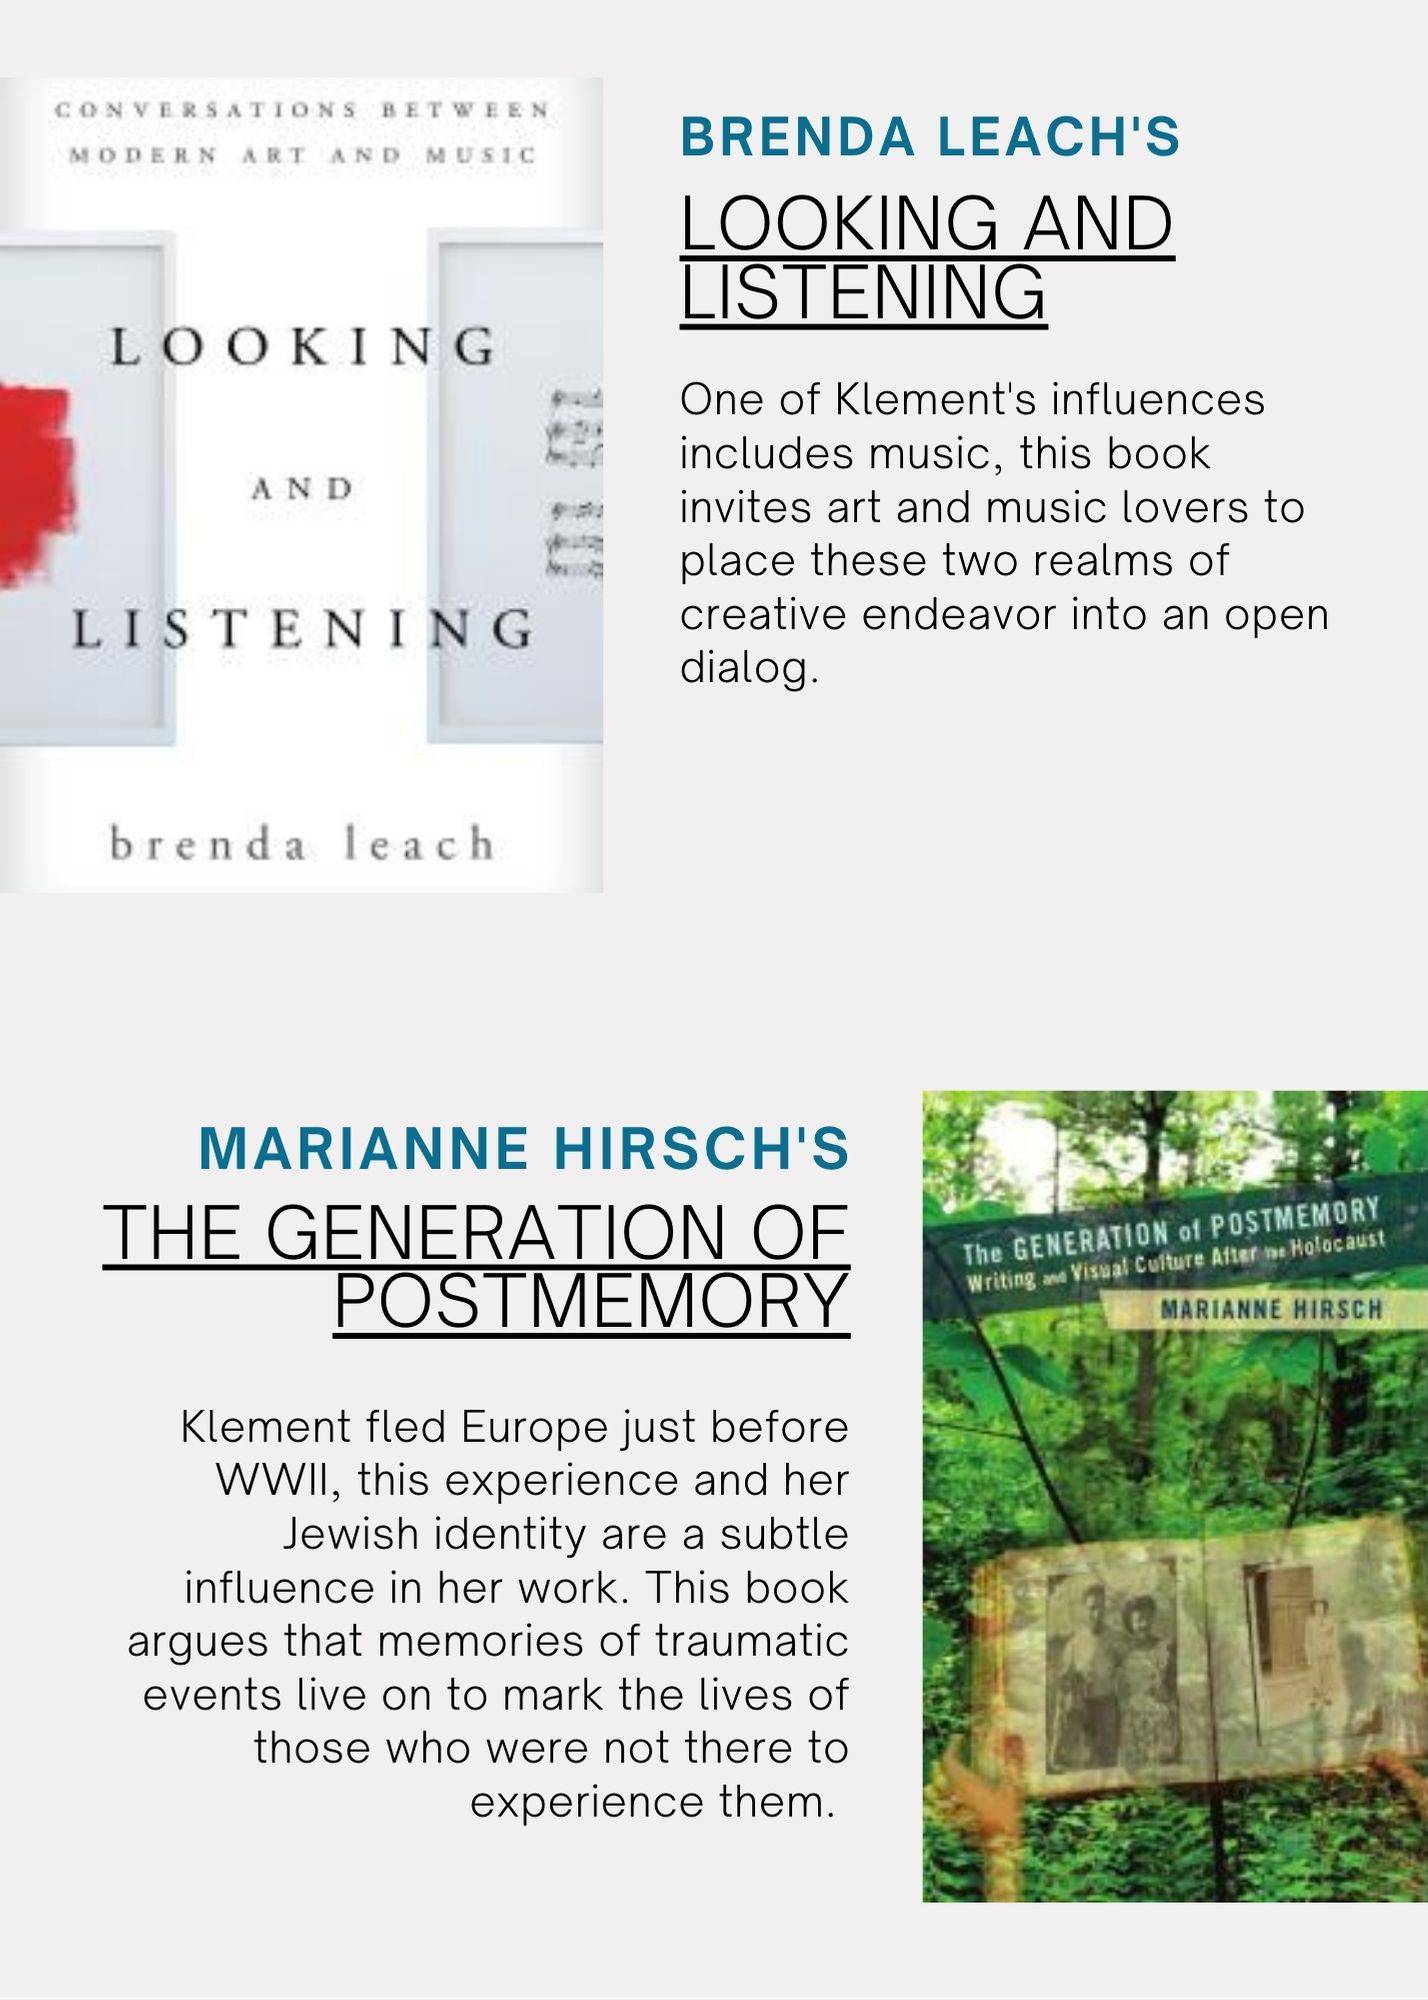 Two book covers, Brenda Leach's Looking and Listening, and Marianne Hirsch's A Generation of Post Memory